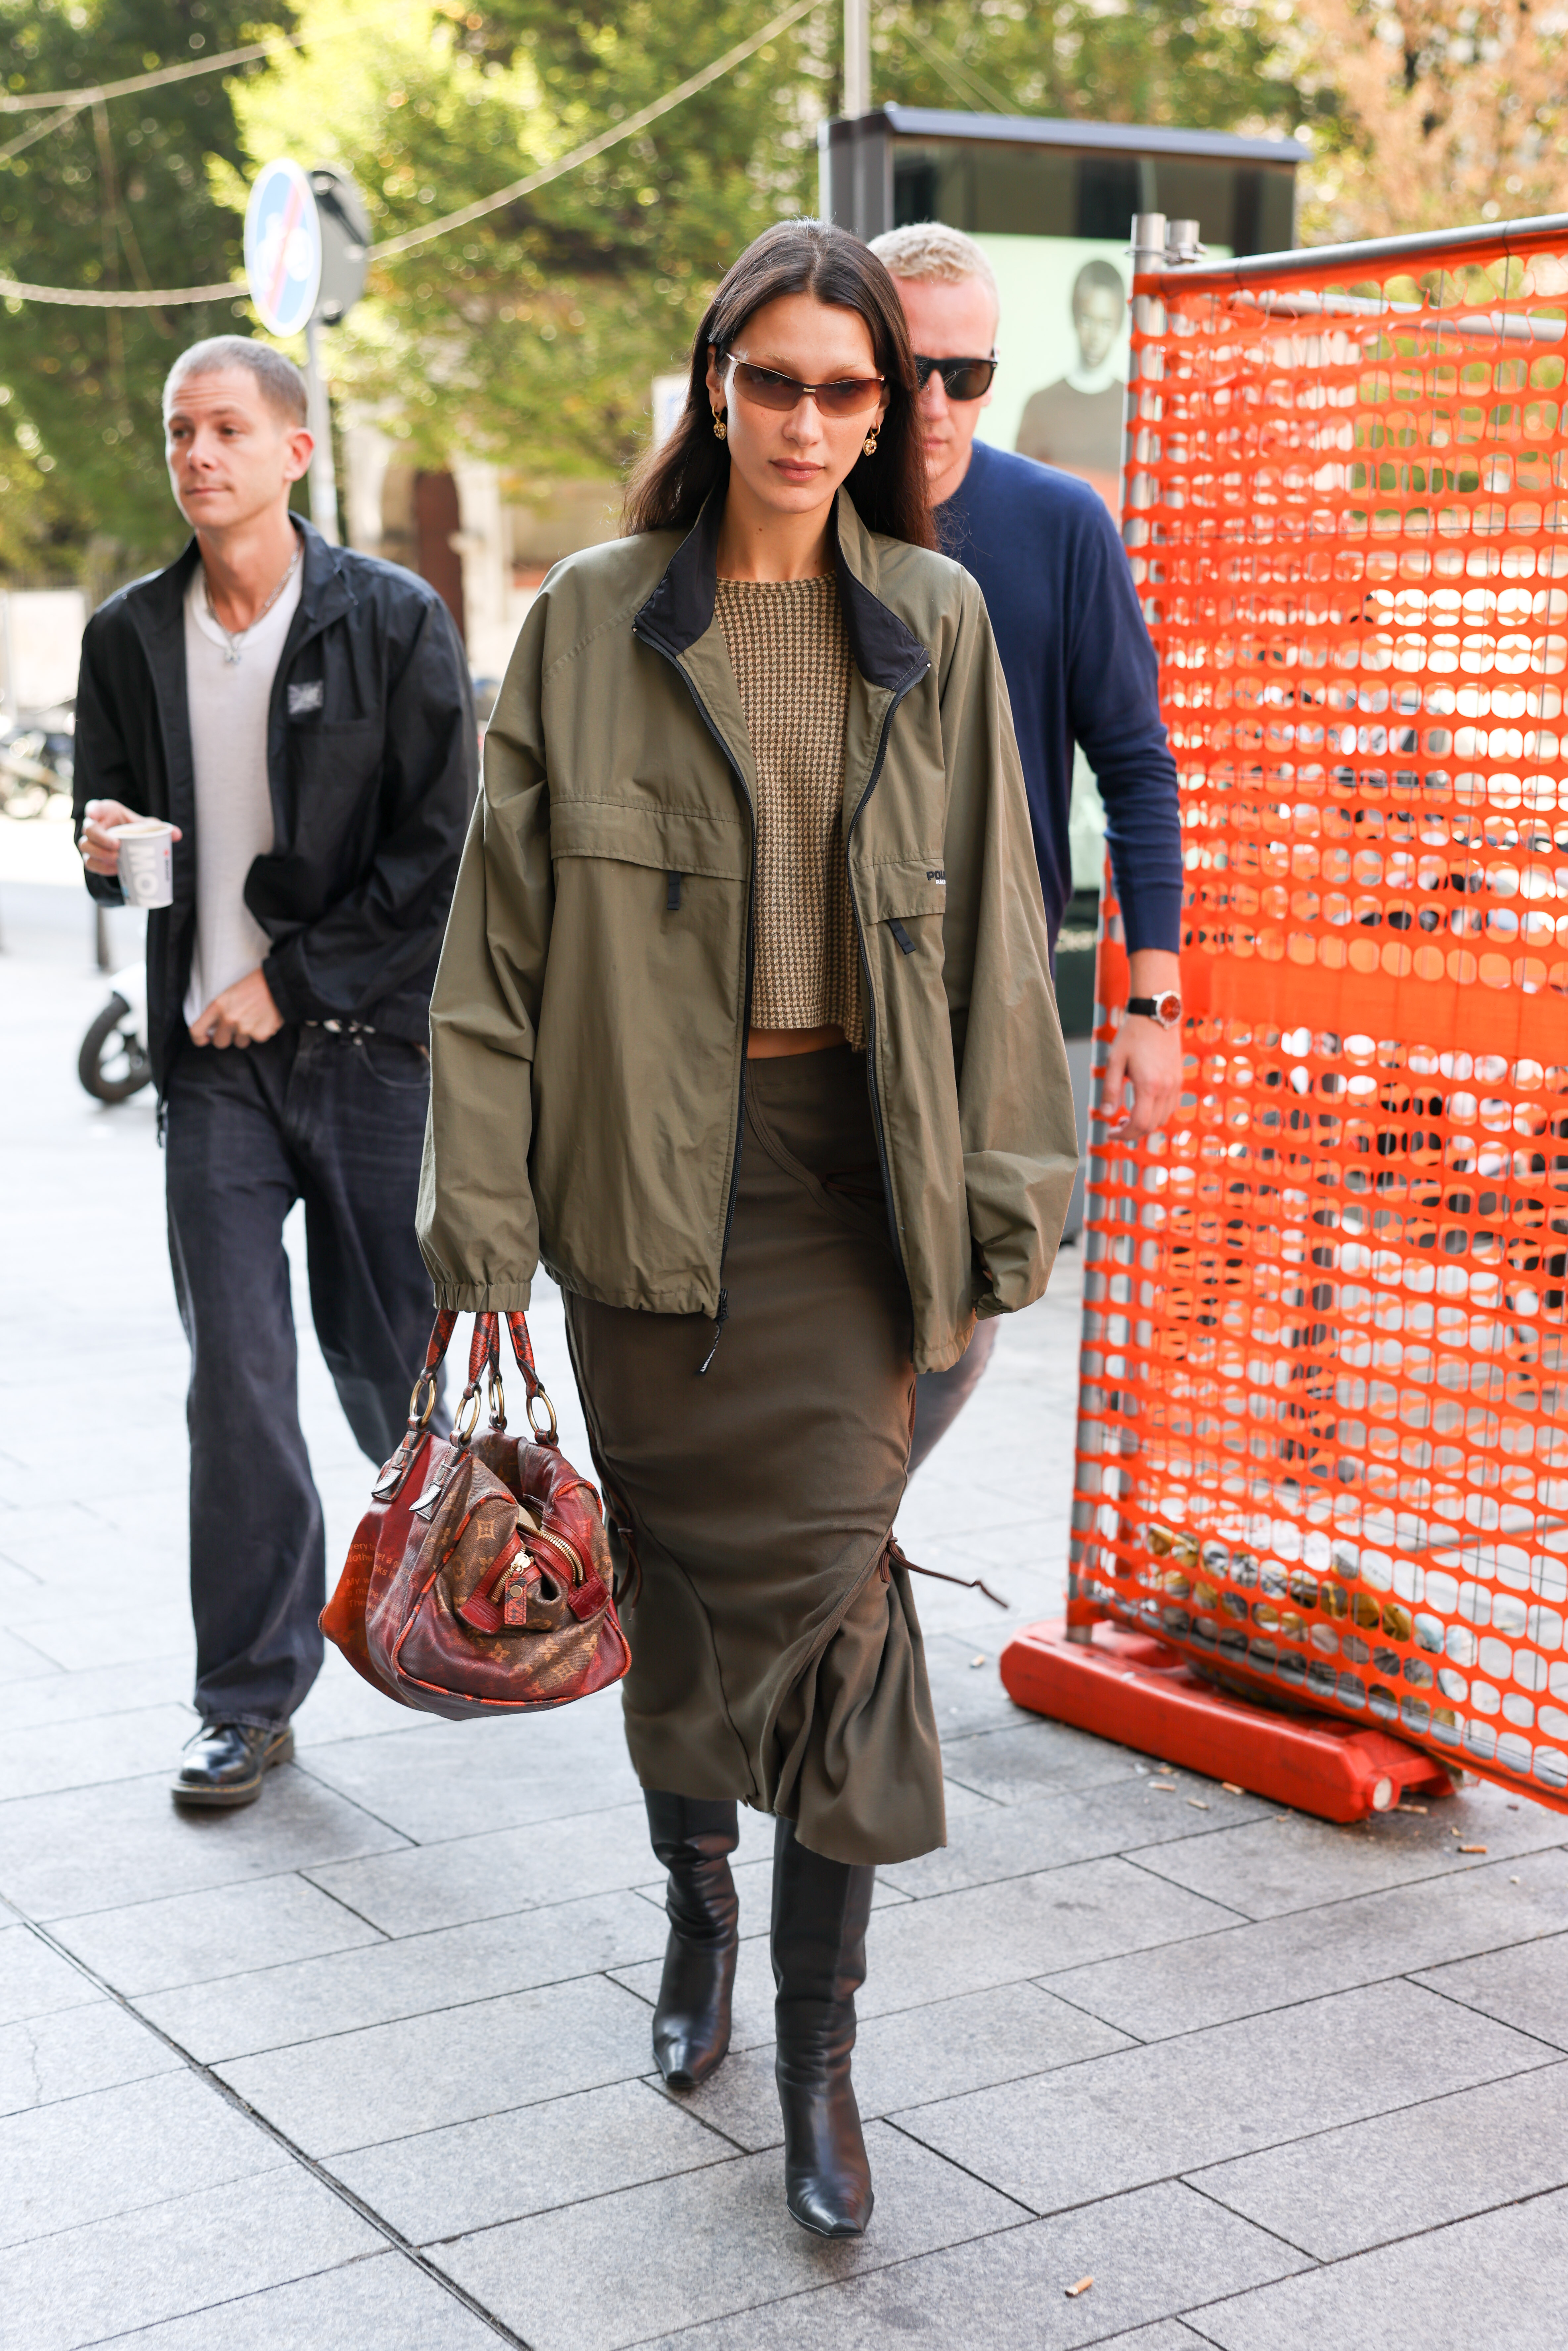 Bella Hadid Arrives For Milan Fashion Week in Boho Chic Style